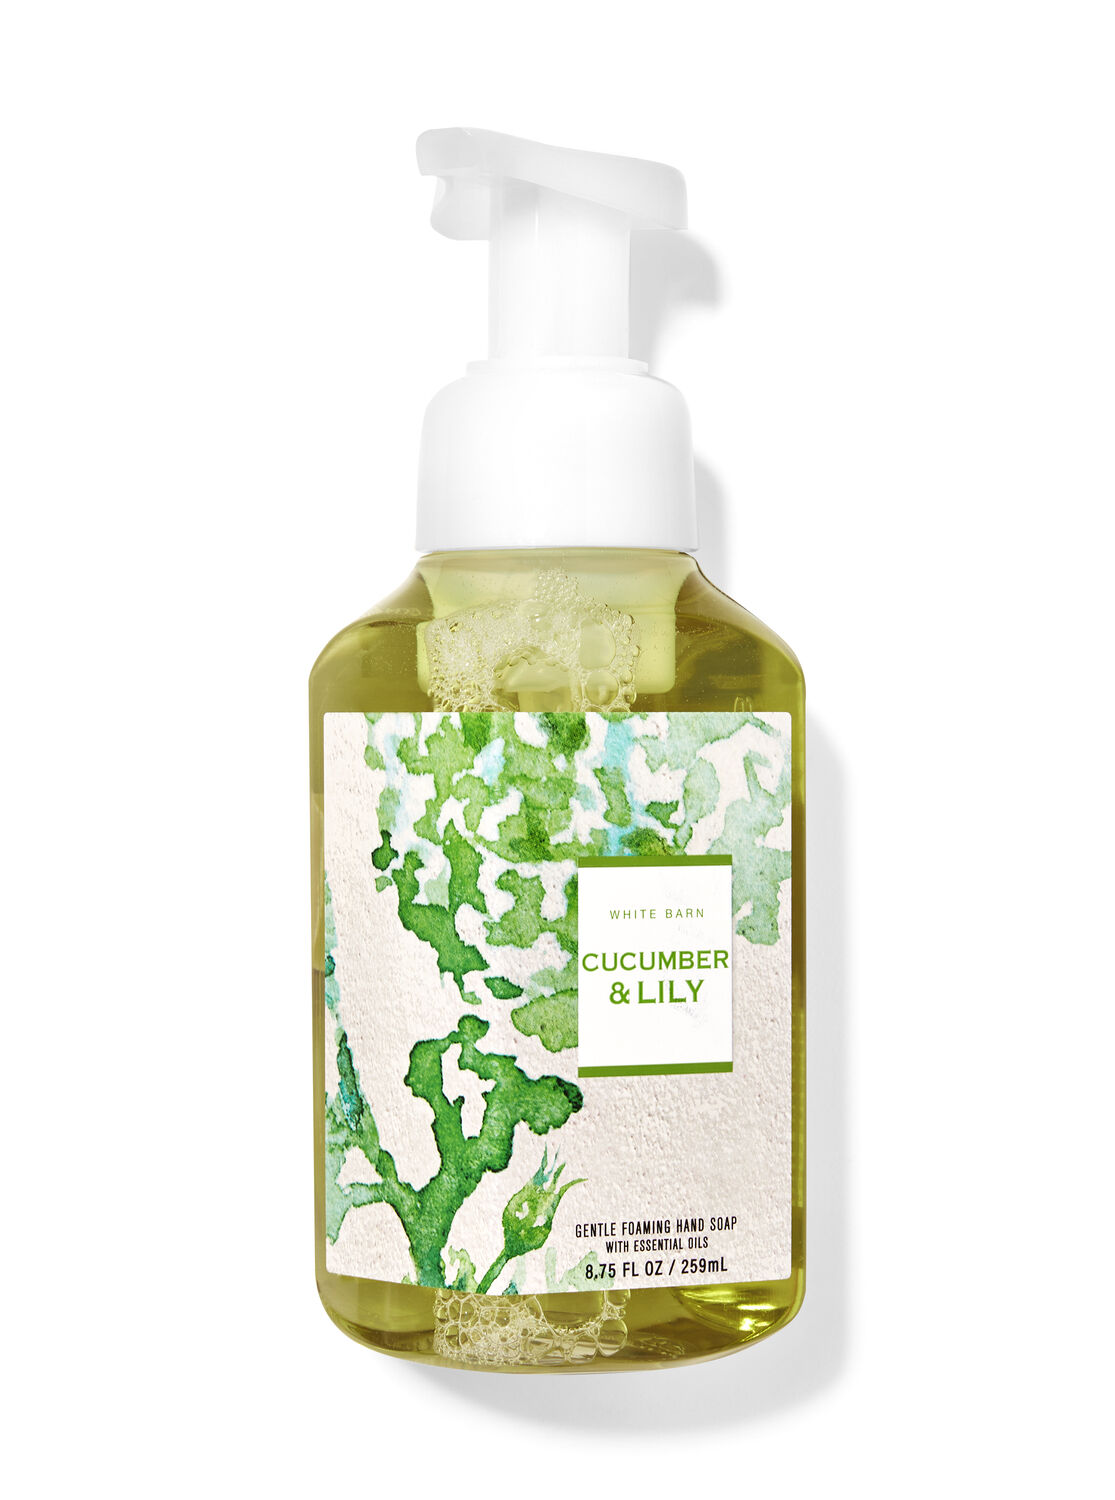 Cucumber & Lily Gentle Foaming Hand Soap